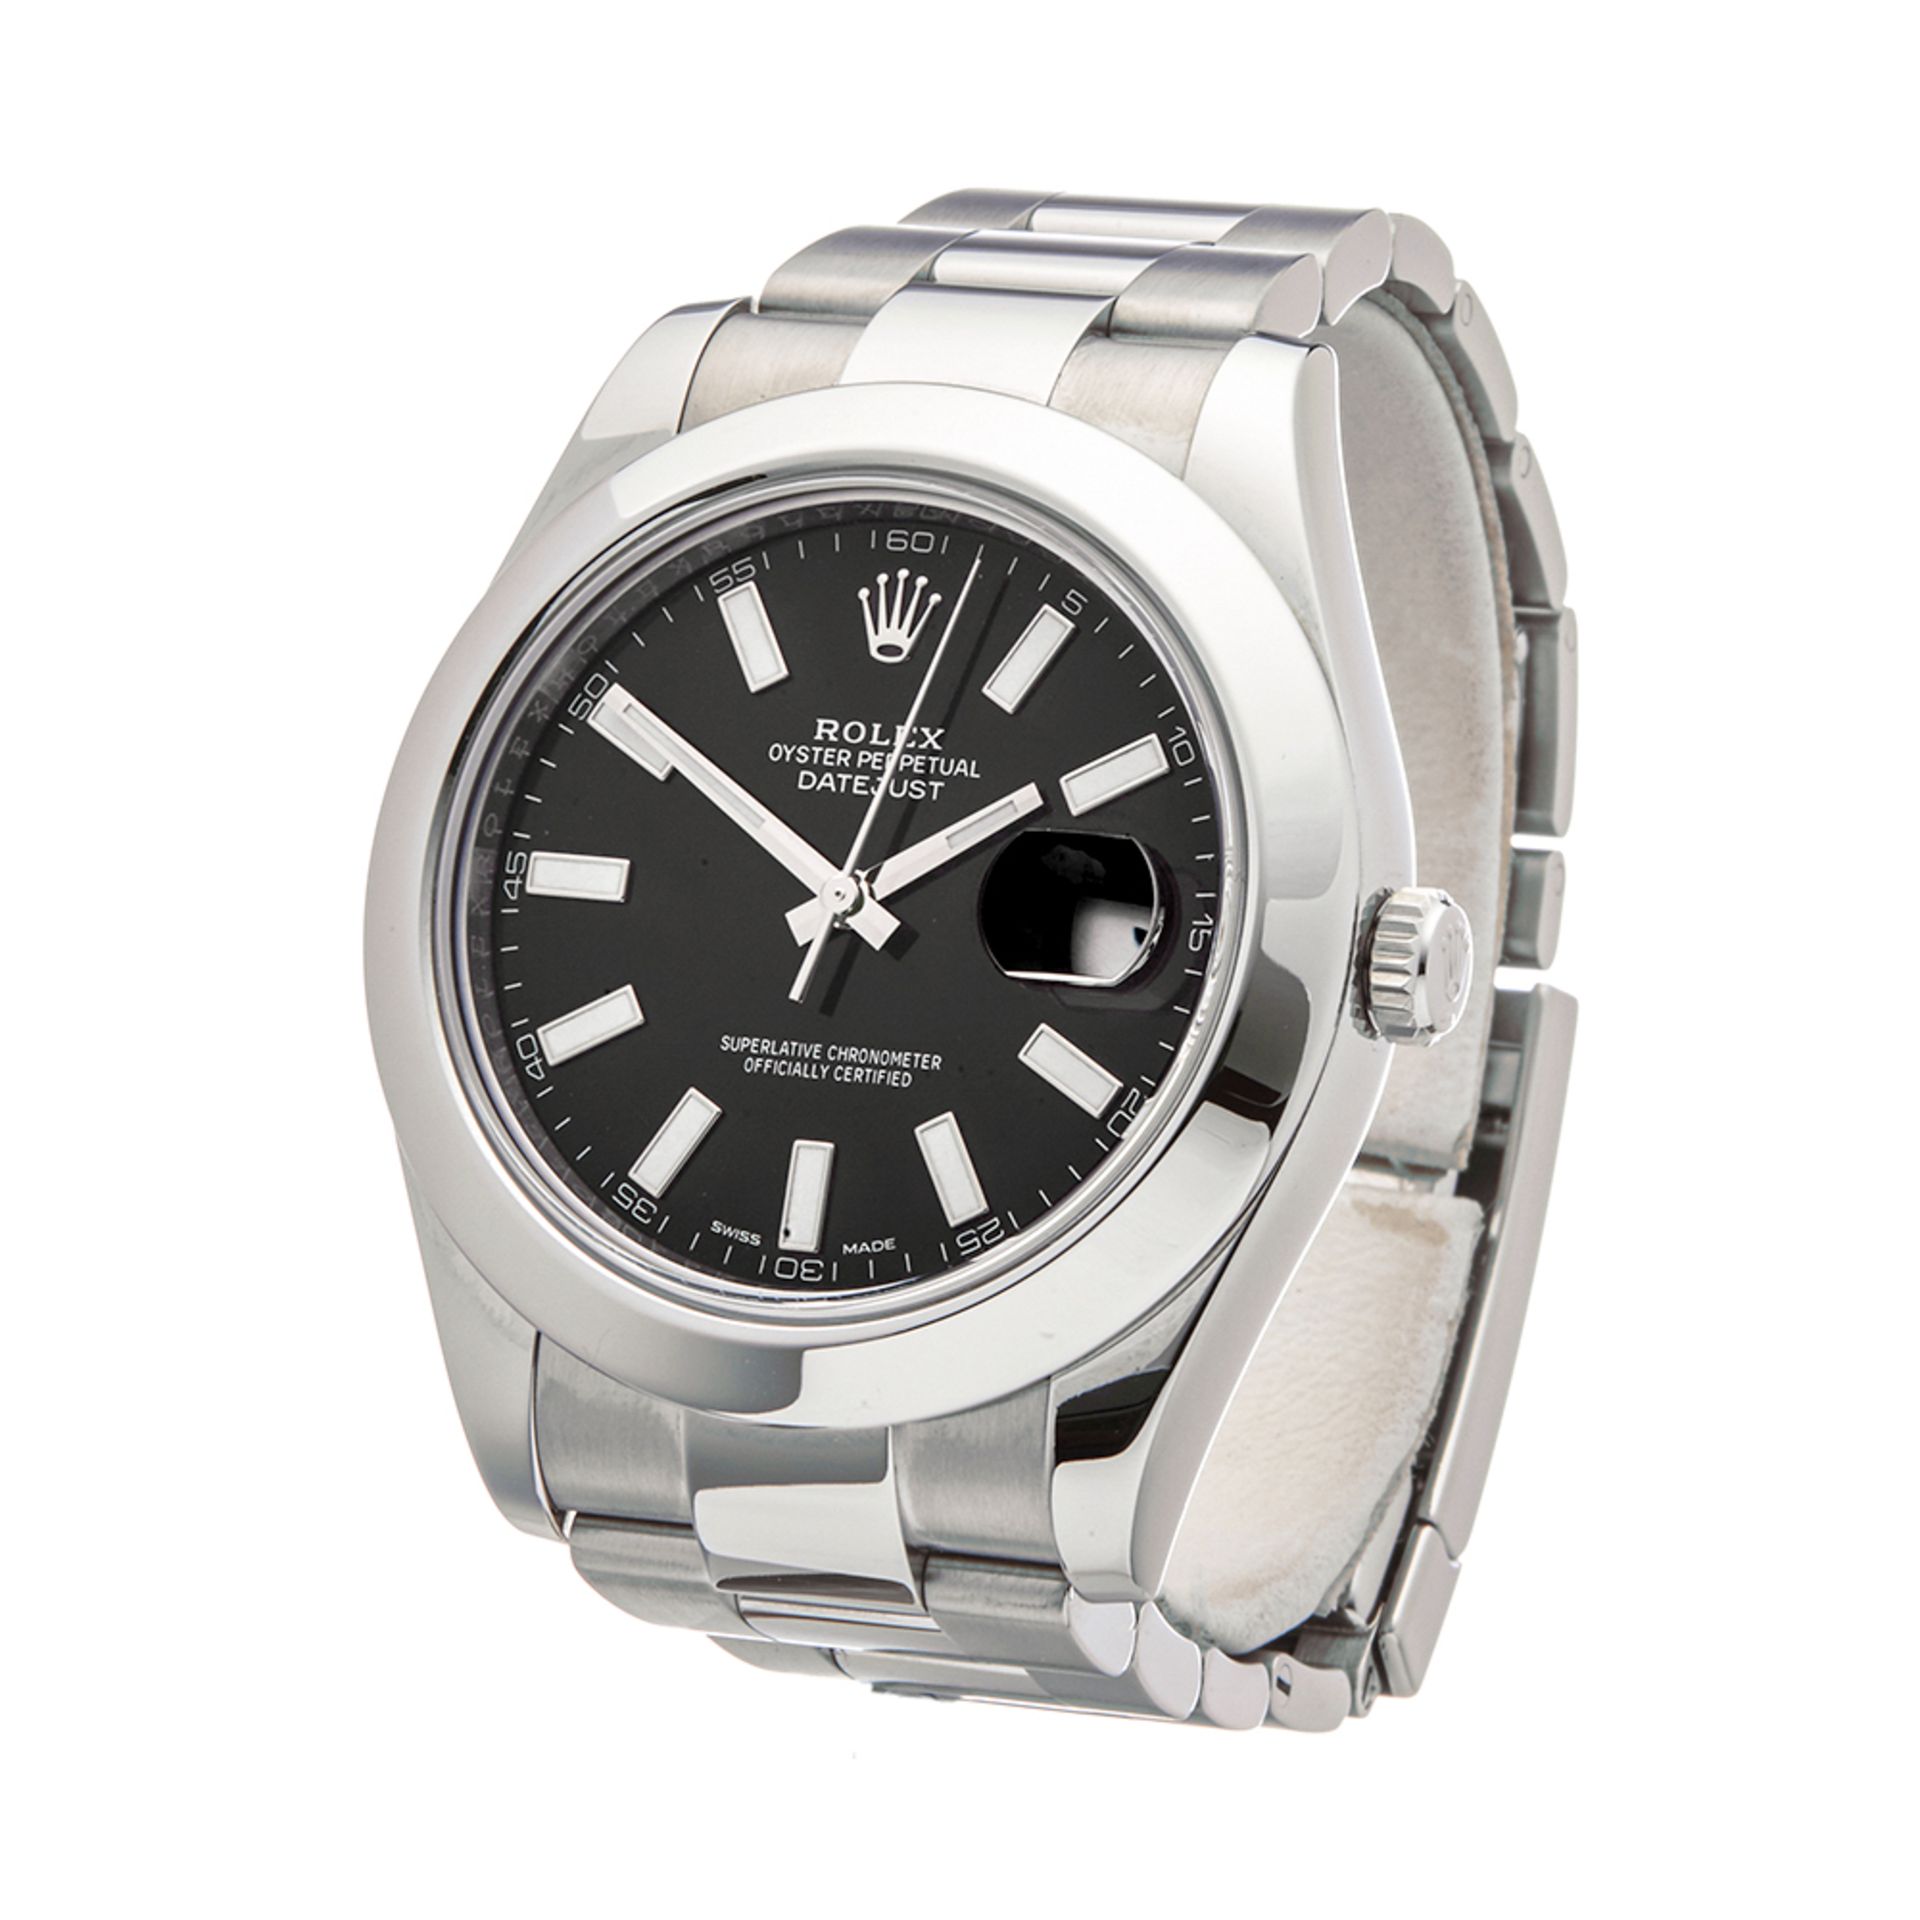 Rolex Datejust II 41mm Stainless Steel - 116300 - Image 3 of 7